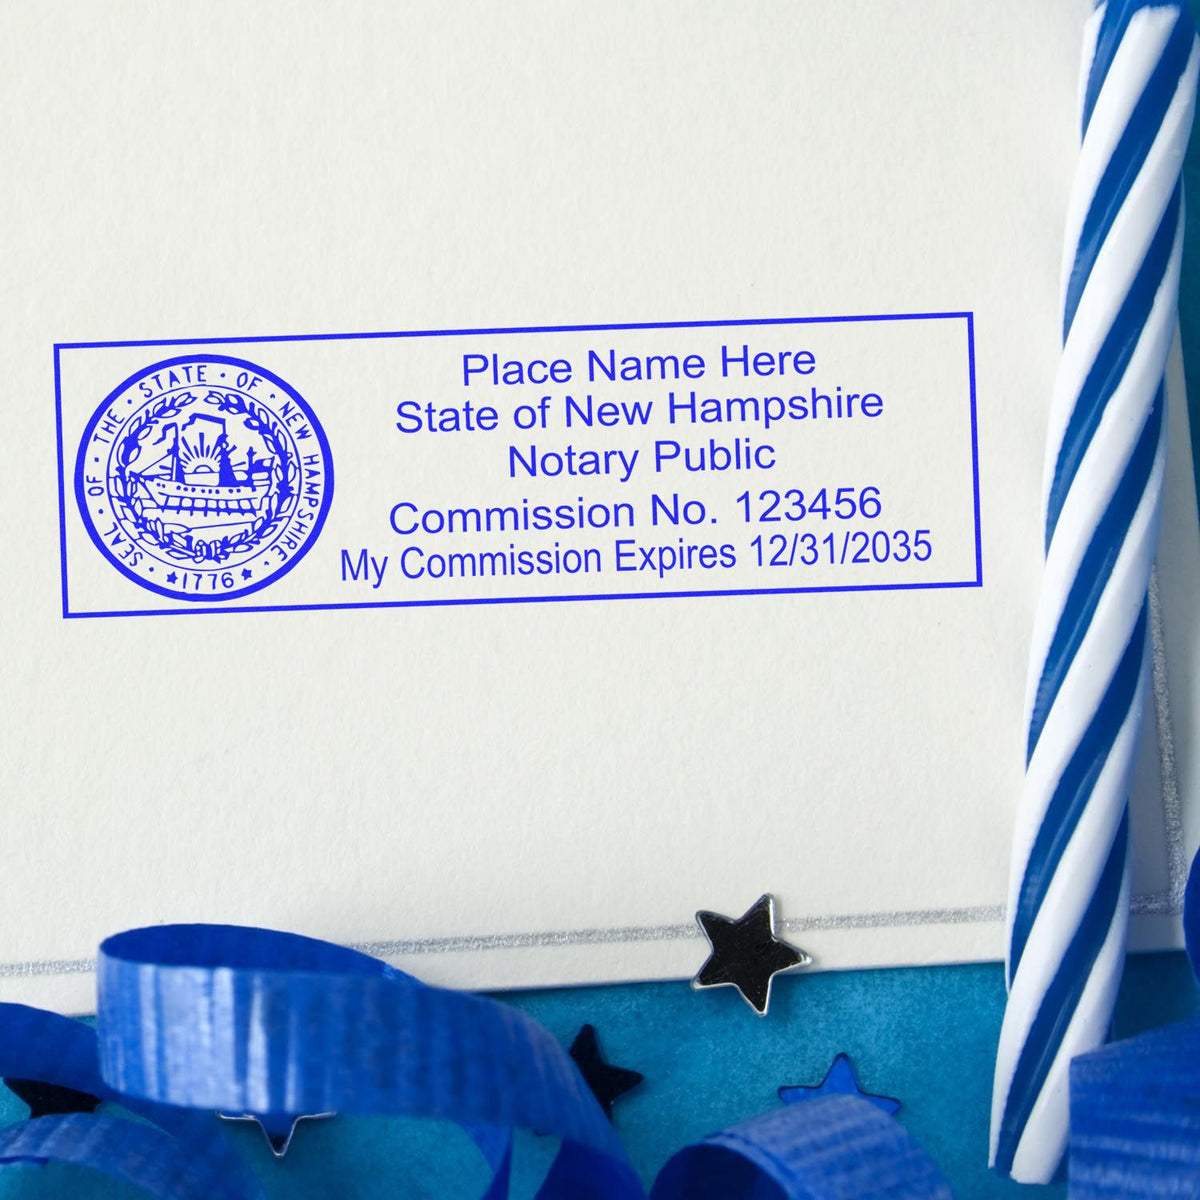 Slim Pre-Inked State Seal Notary Stamp for New Hampshire in use photo showing a stamped imprint of the Slim Pre-Inked State Seal Notary Stamp for New Hampshire